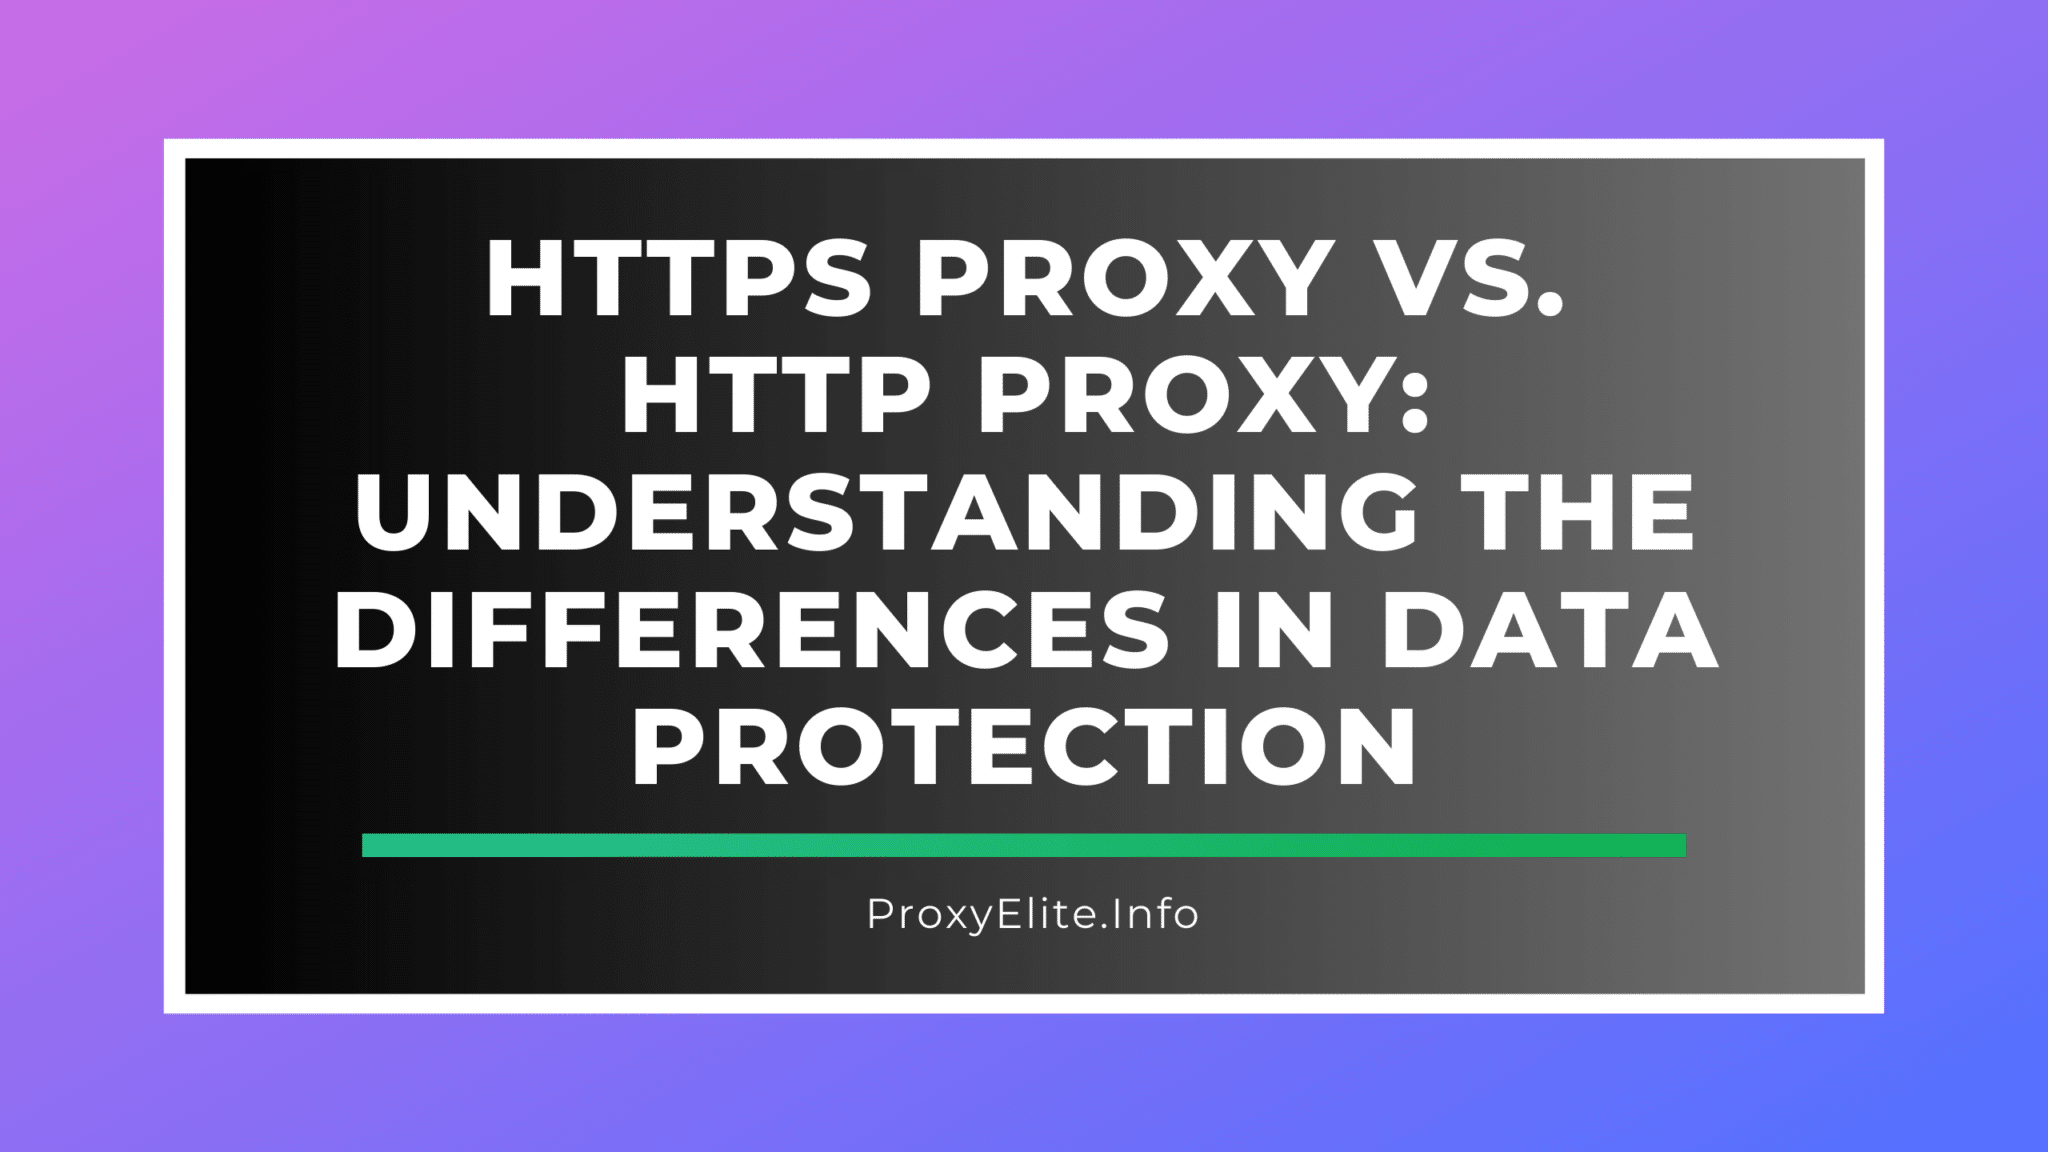 HTTPS Proxy vs. HTTP Proxy: Understanding the Differences in Data Protection